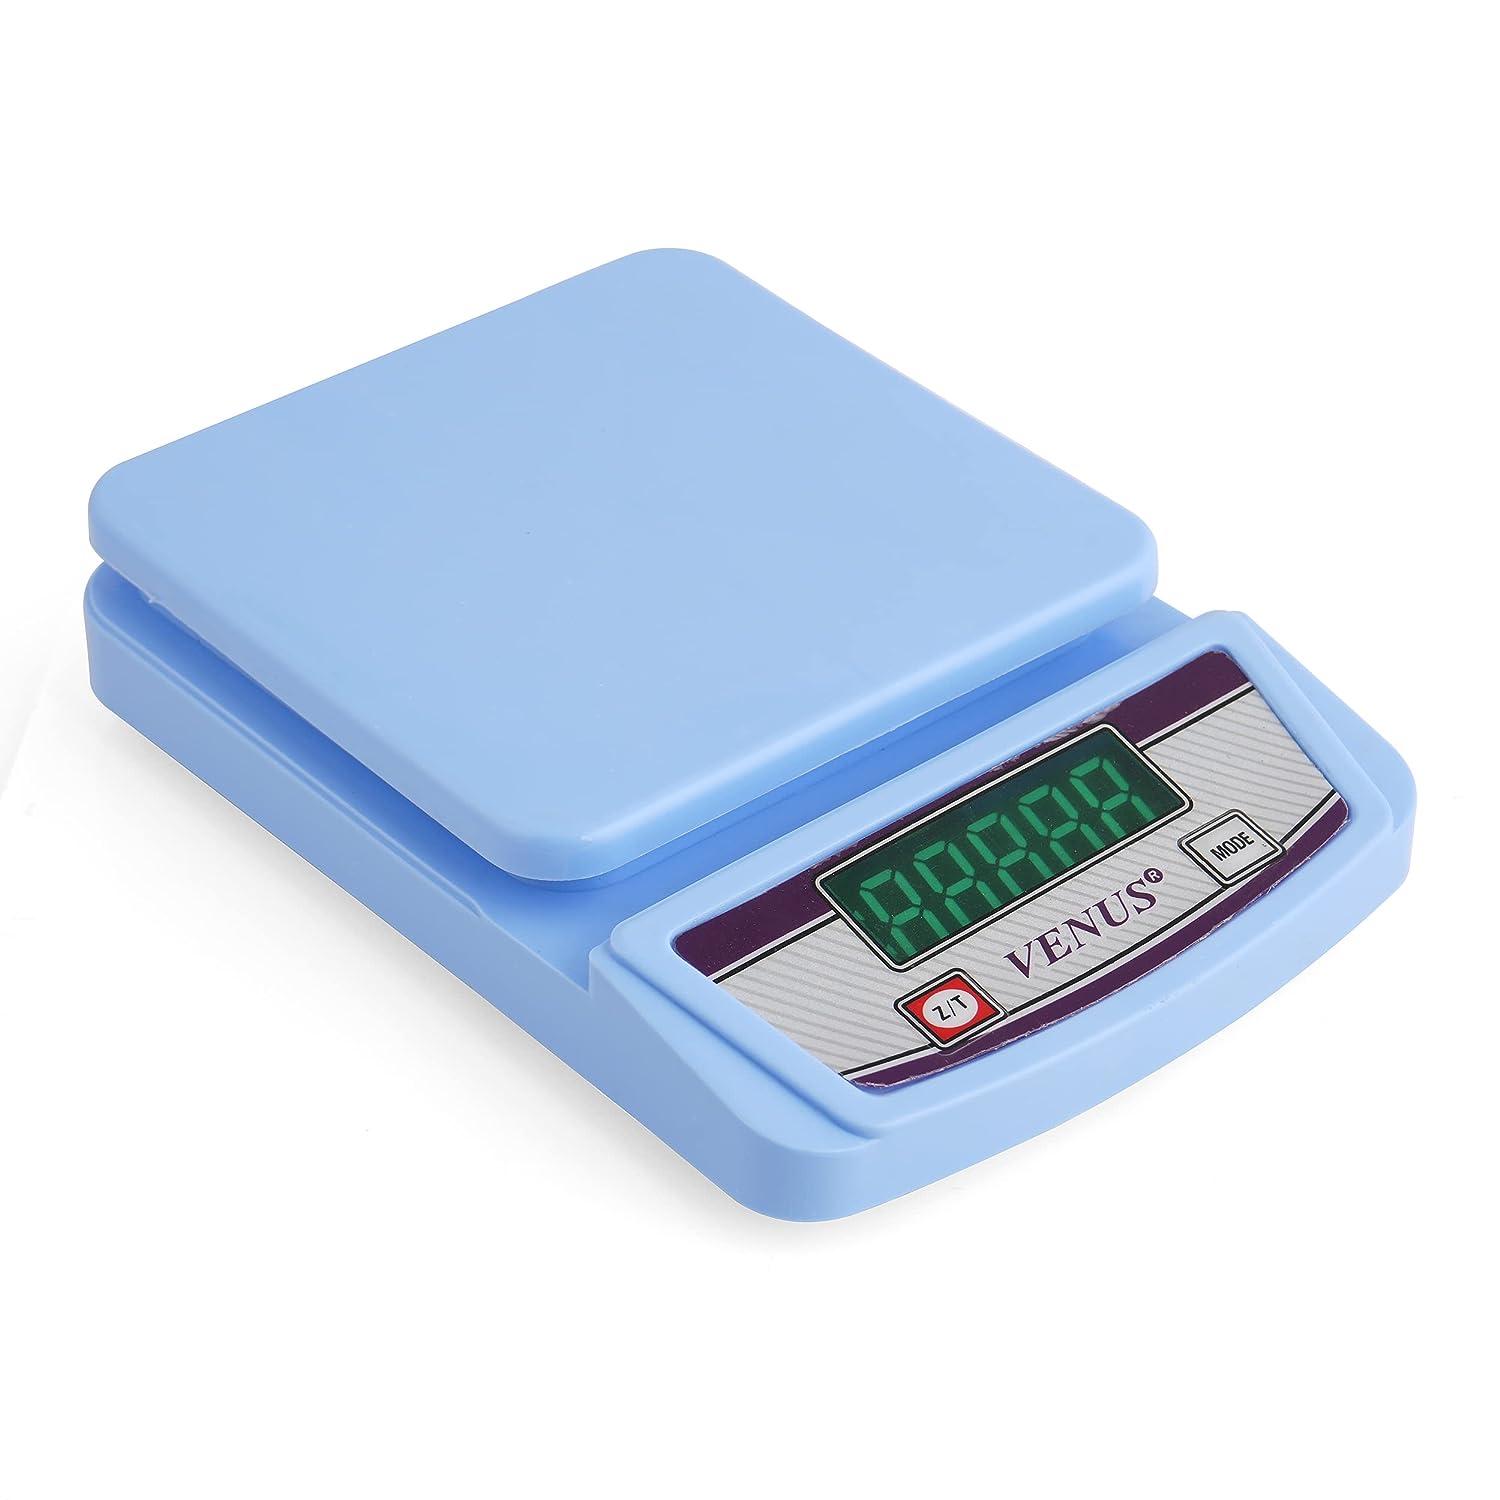 Venus Electronic LED Rechargeable Digital Kitchen Weighing Scale, Food Weight Machine for Home, Baking, Health 10 kg *1 g